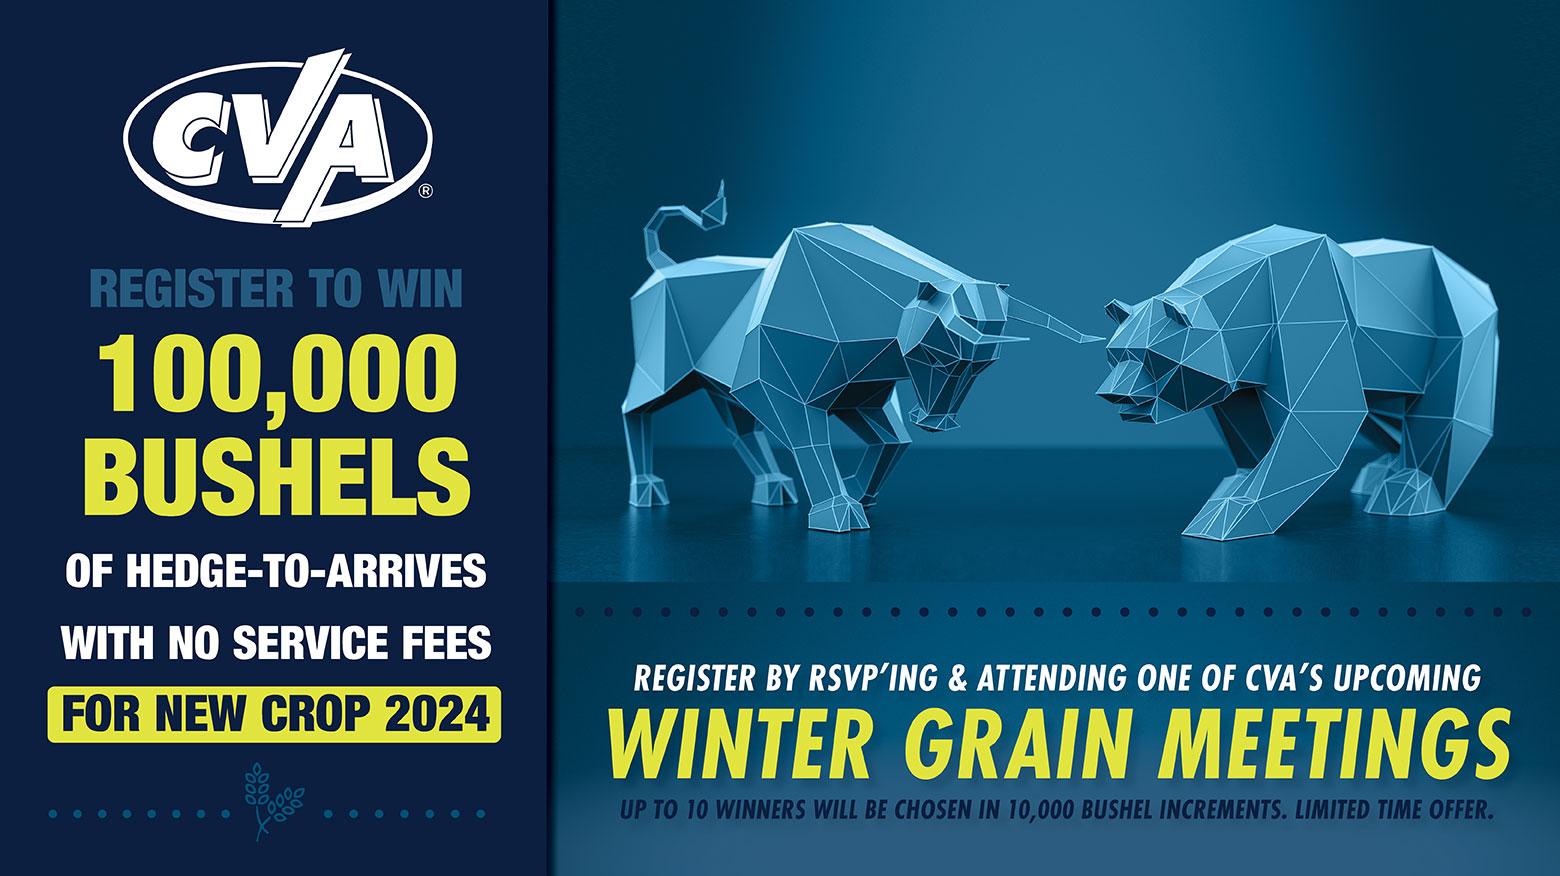 Winter Grain Meetings and Registration to Win